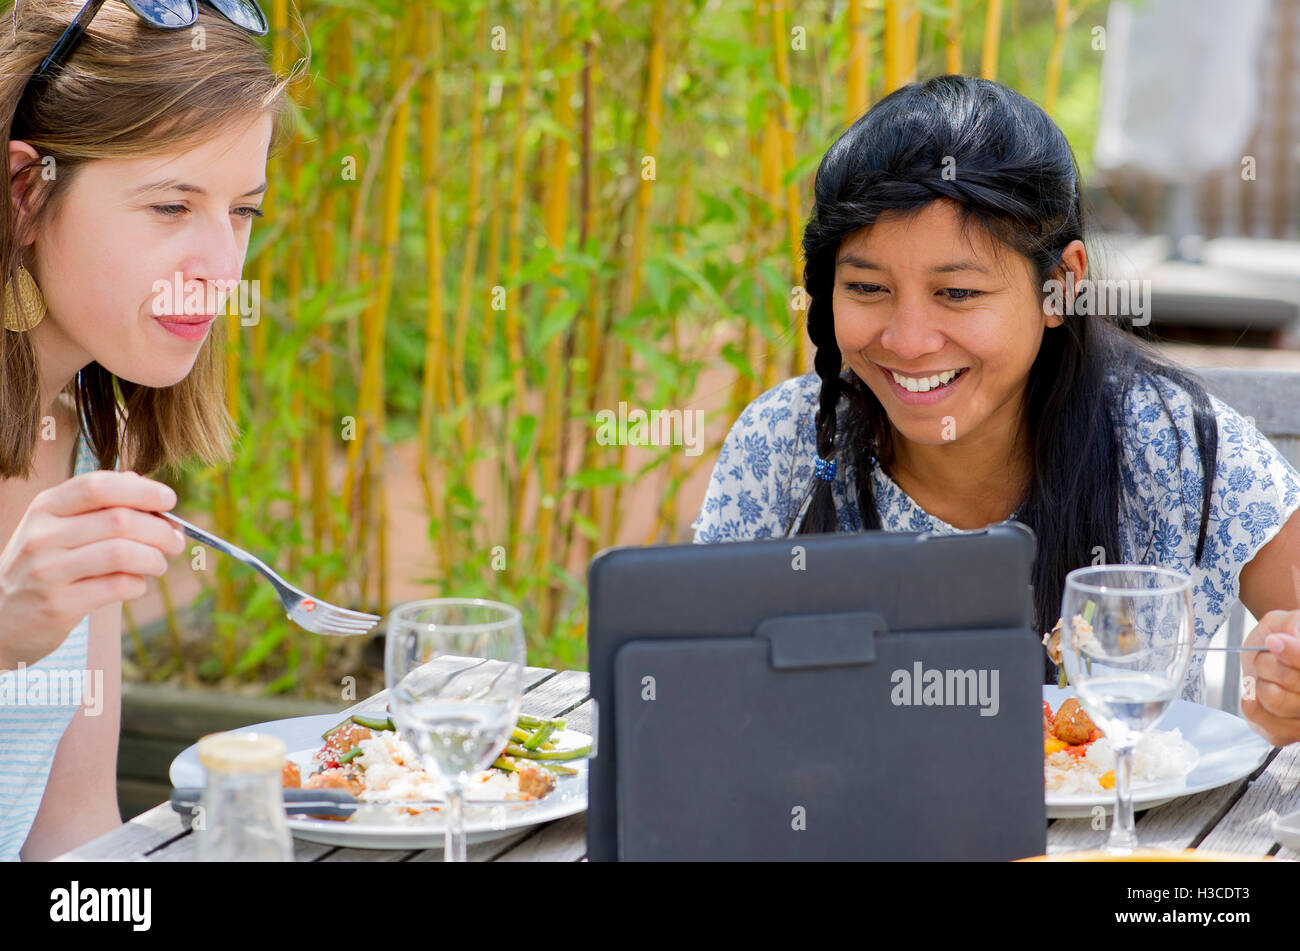 Women watching digital tablet while eating outdoors Stock Photo